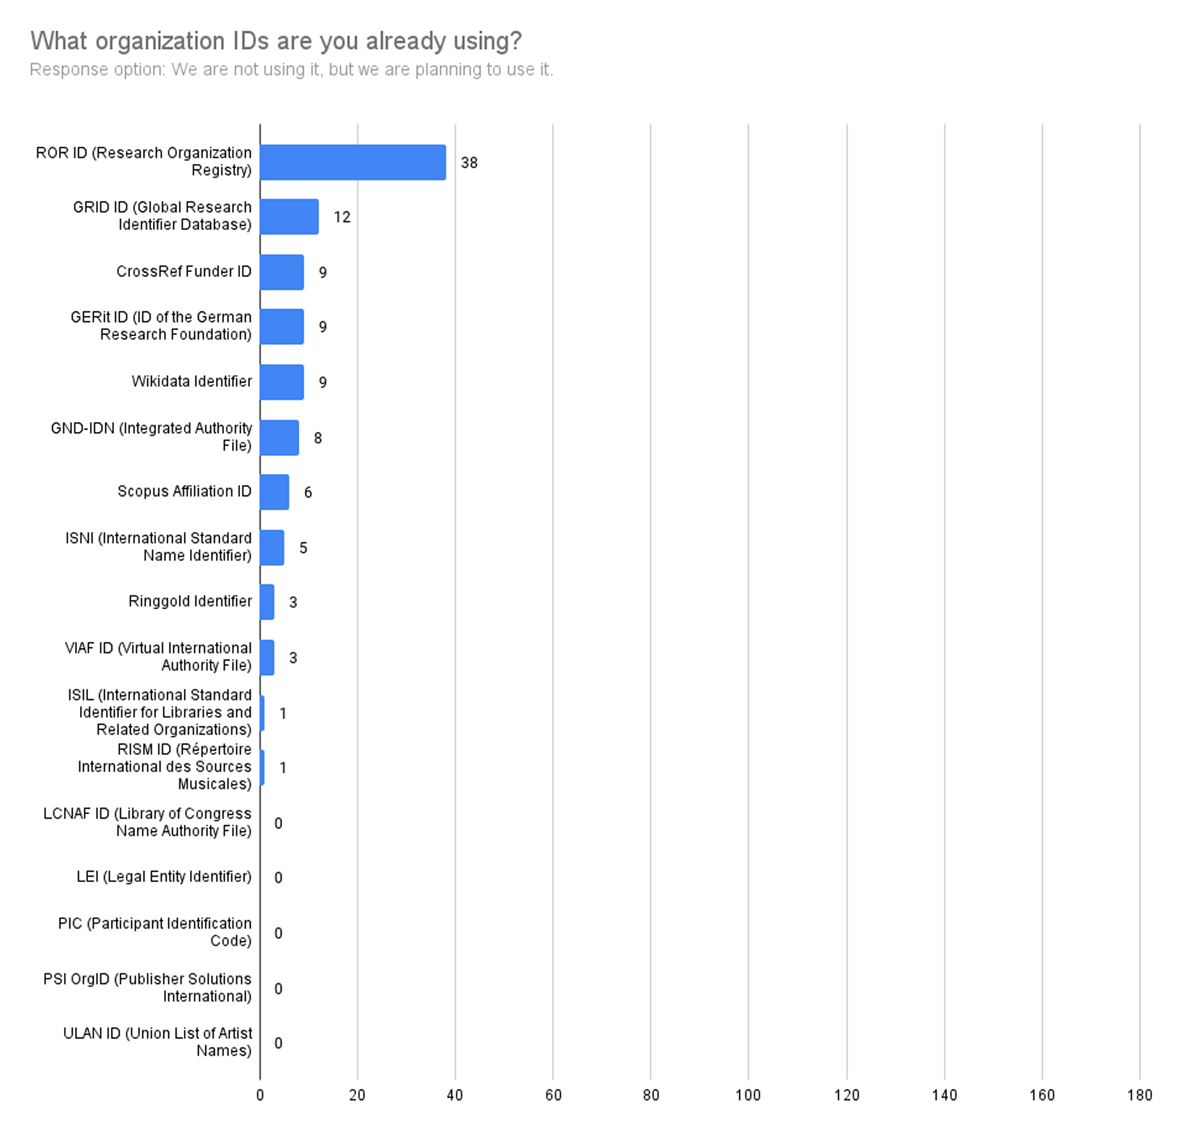 Distribution and number of responses to the question, ‘What organization IDs are you already using?’ (Response option: We are not using it, but we are planning to use it.)